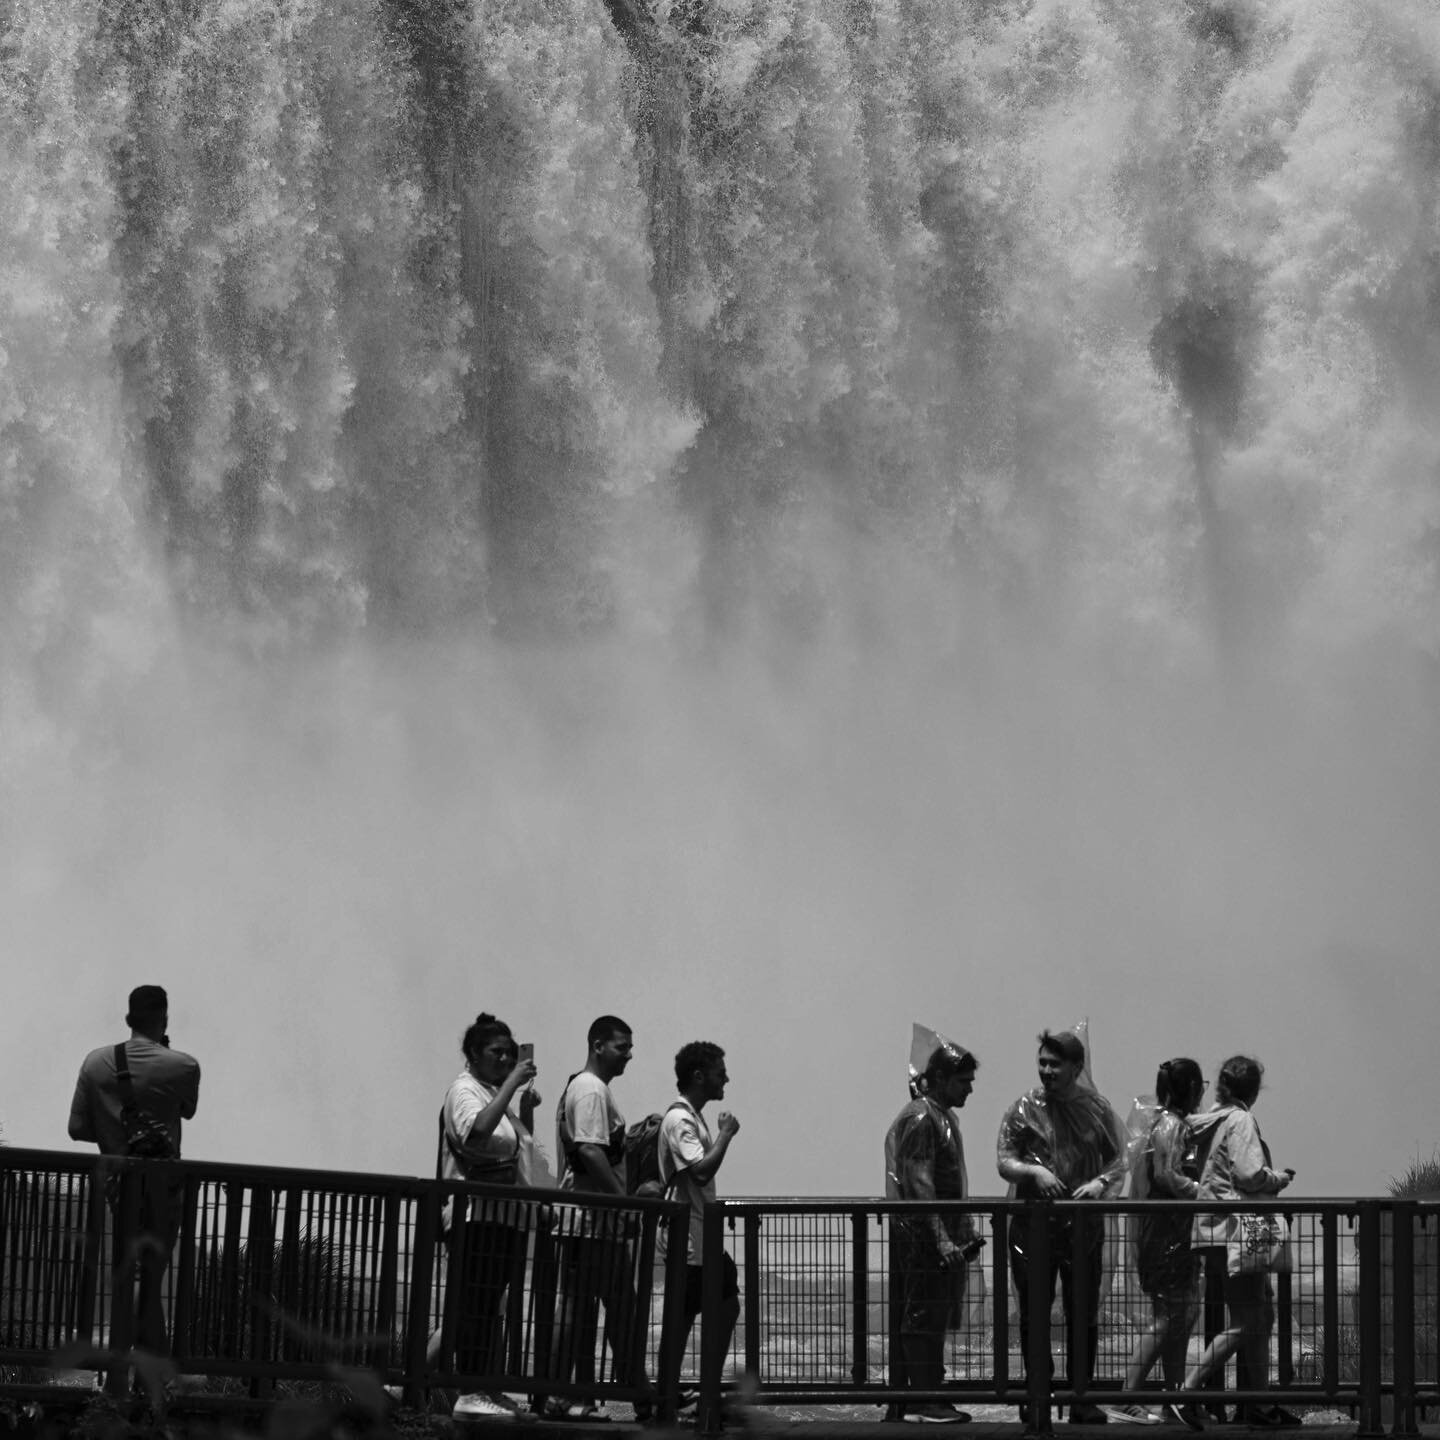 Two cone heads visit Iguazo falls! Wet wet wet!
#iguazufalls #waterfalls #blackandwhite #blackandwhitephotography #landscapes #coneheads